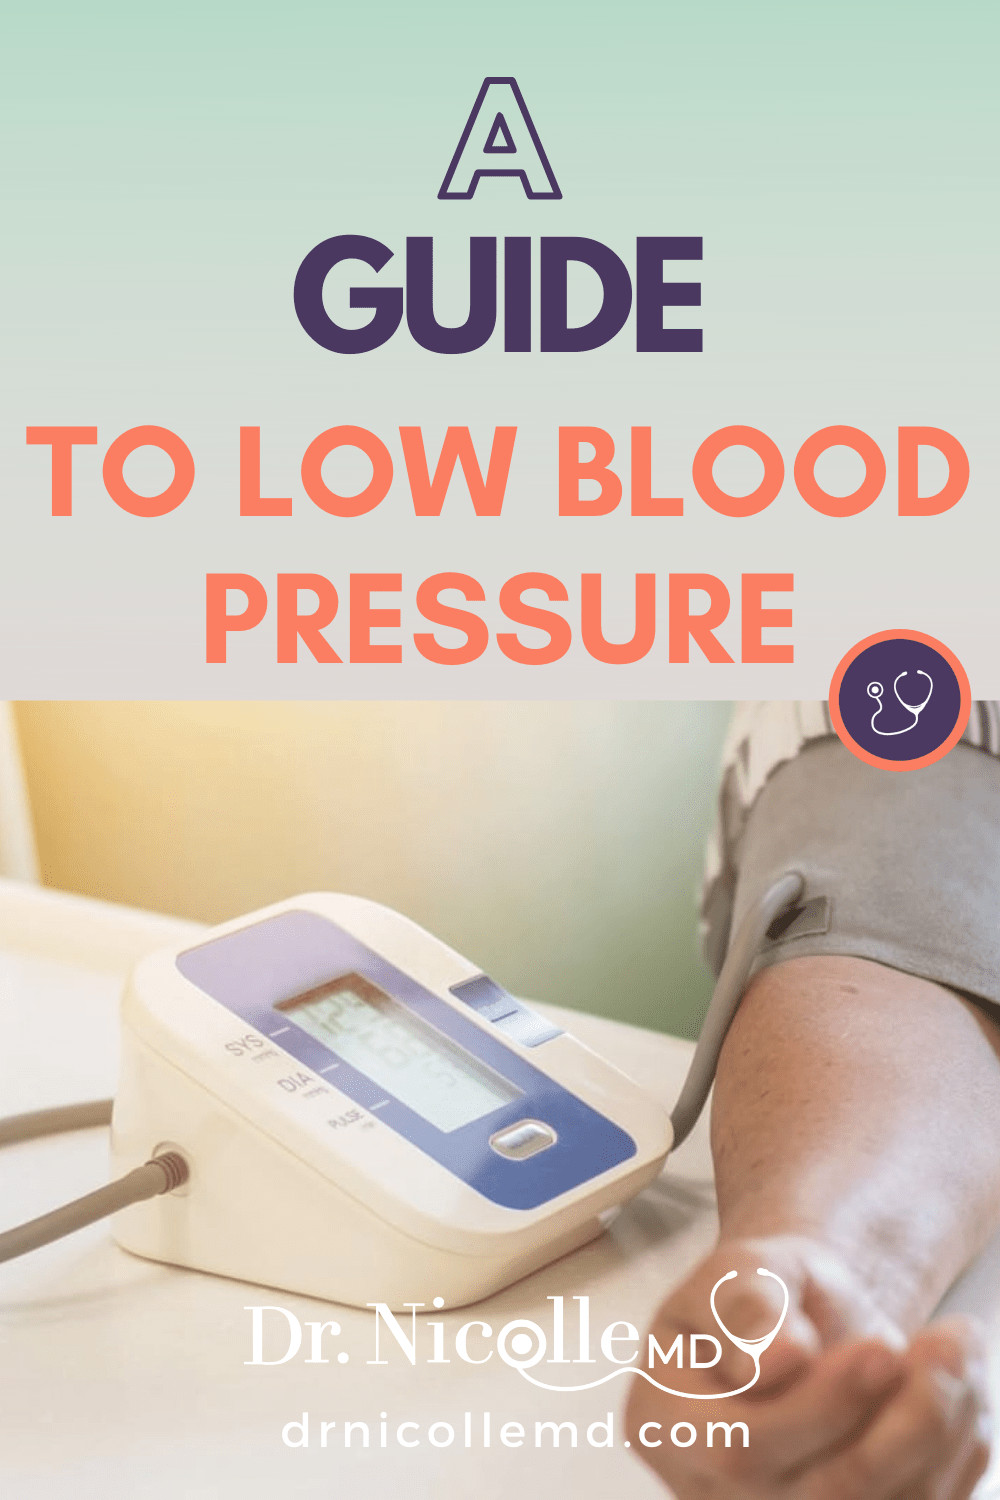 A Guide to Low Blood Pressure